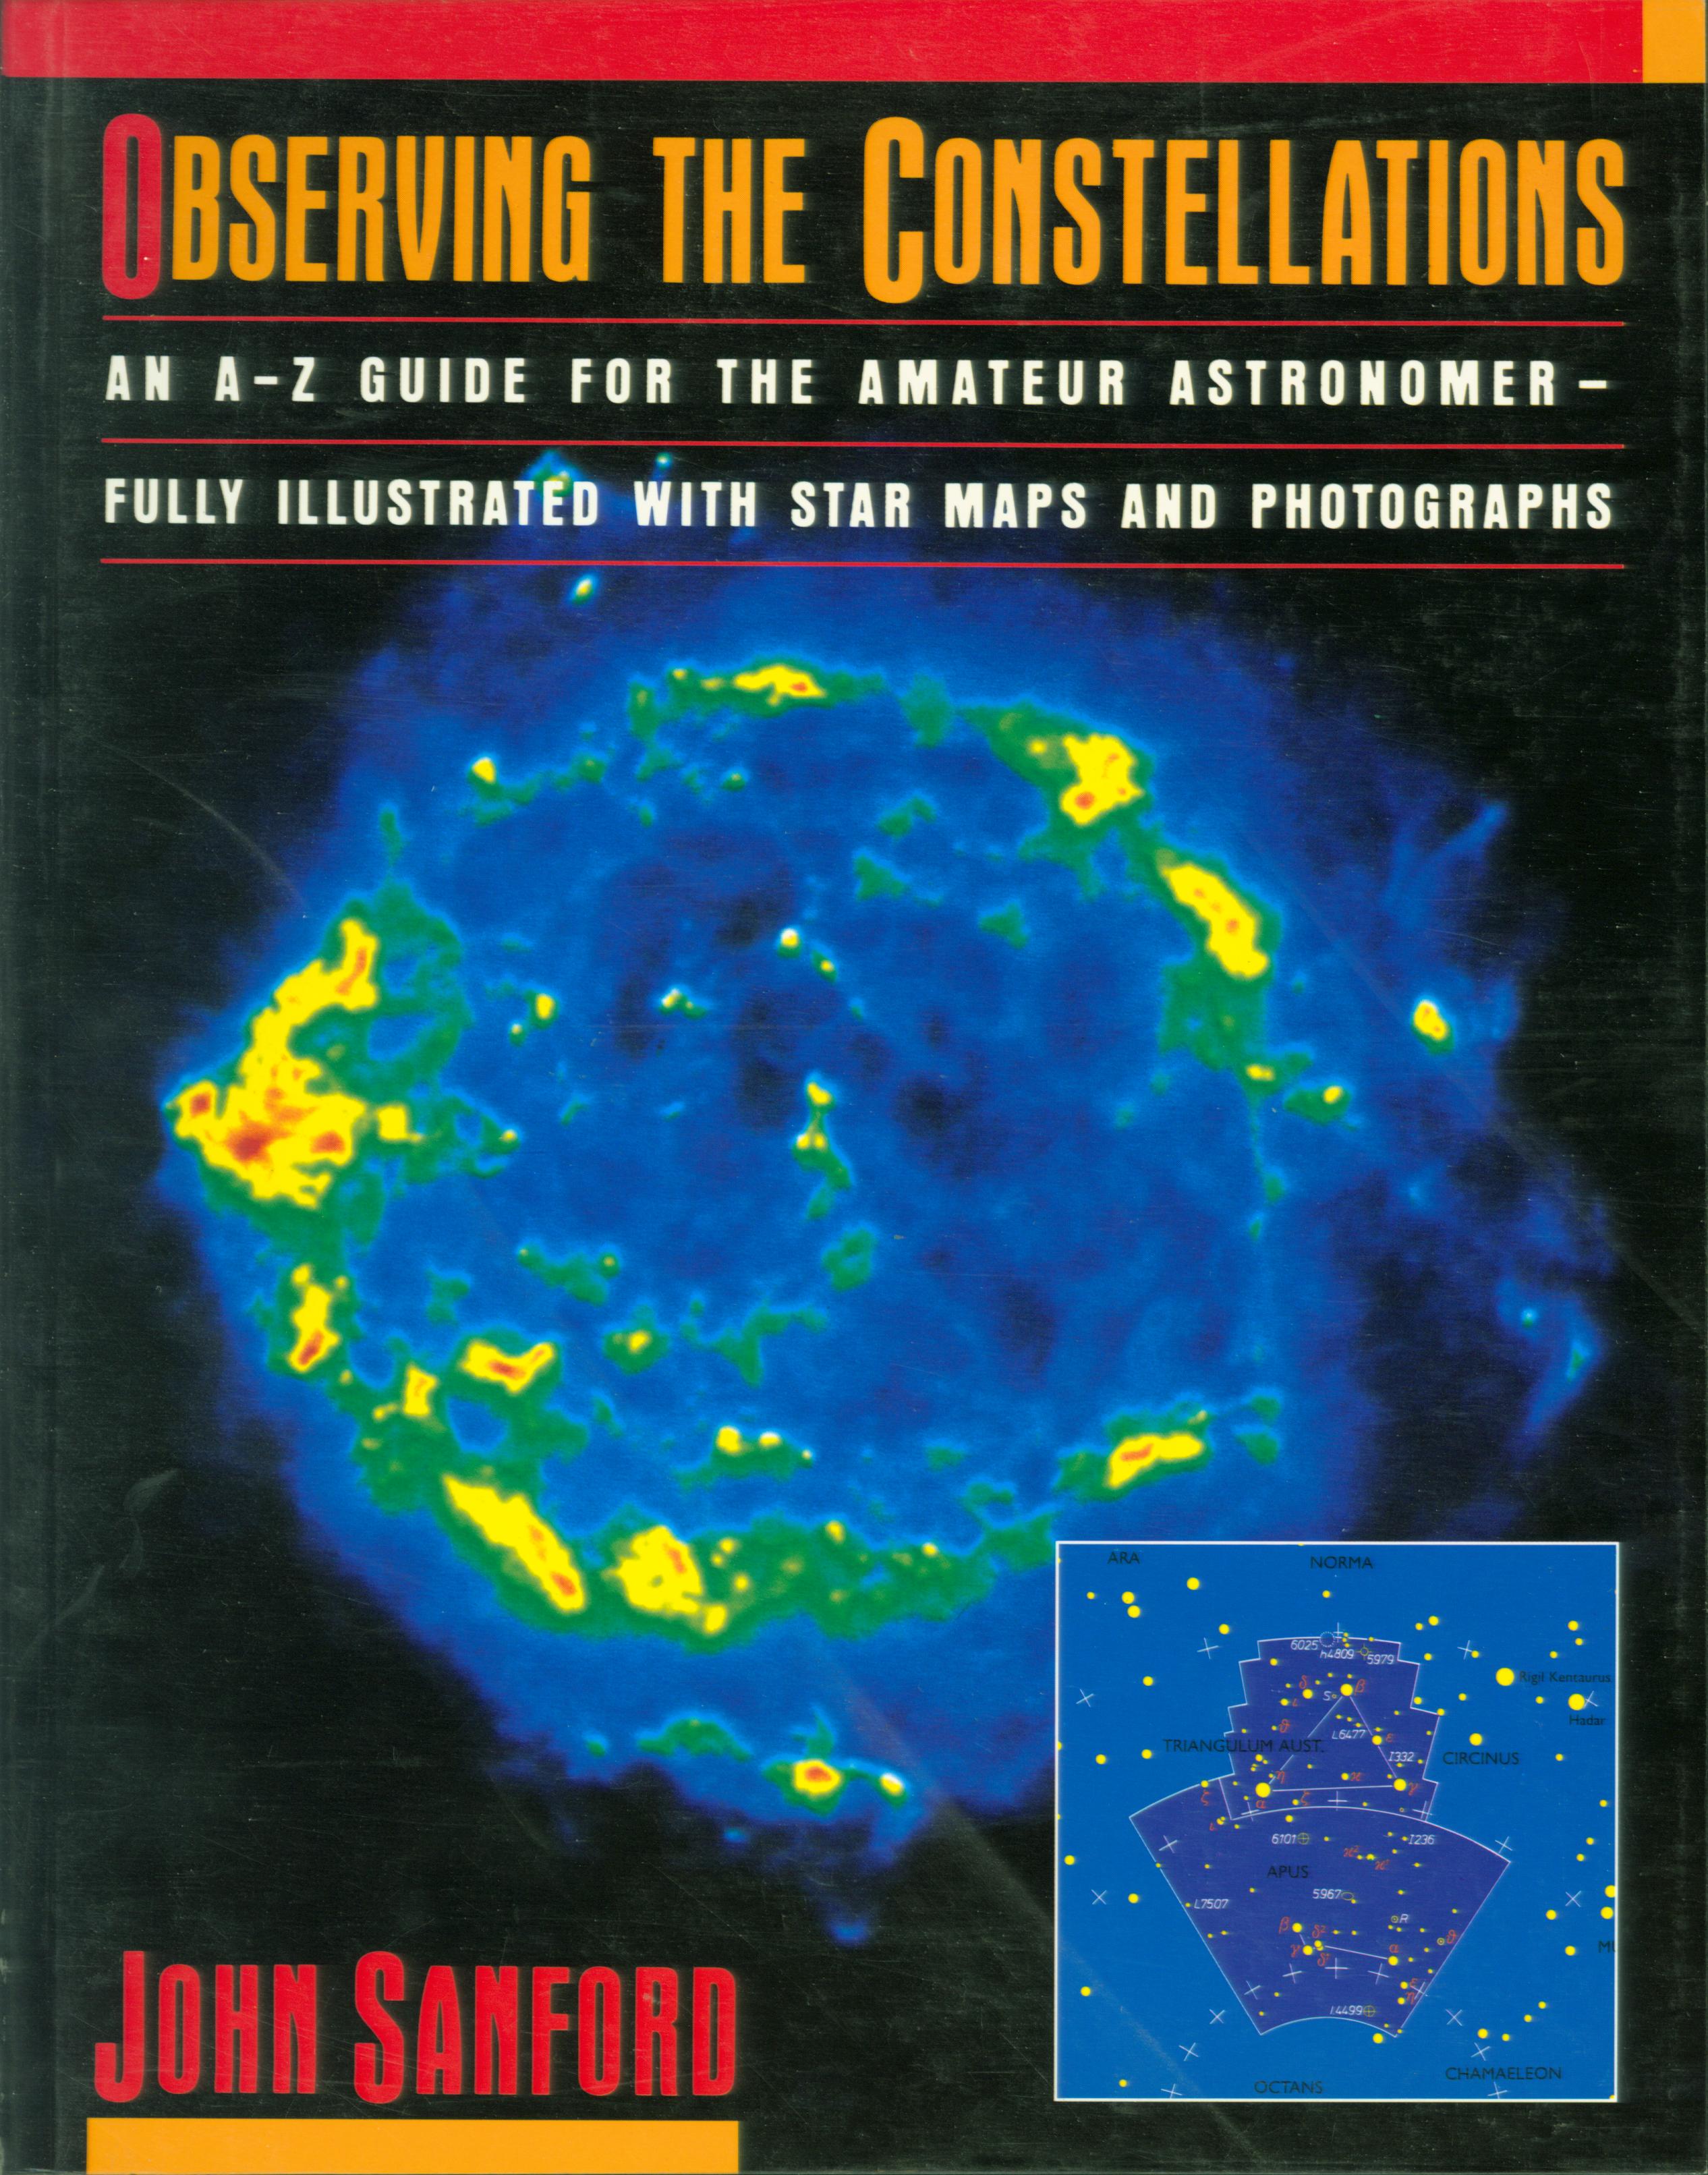 OBSERVING THE CONSTELLATIONS: an A-Z guide for the amateur astronomer.